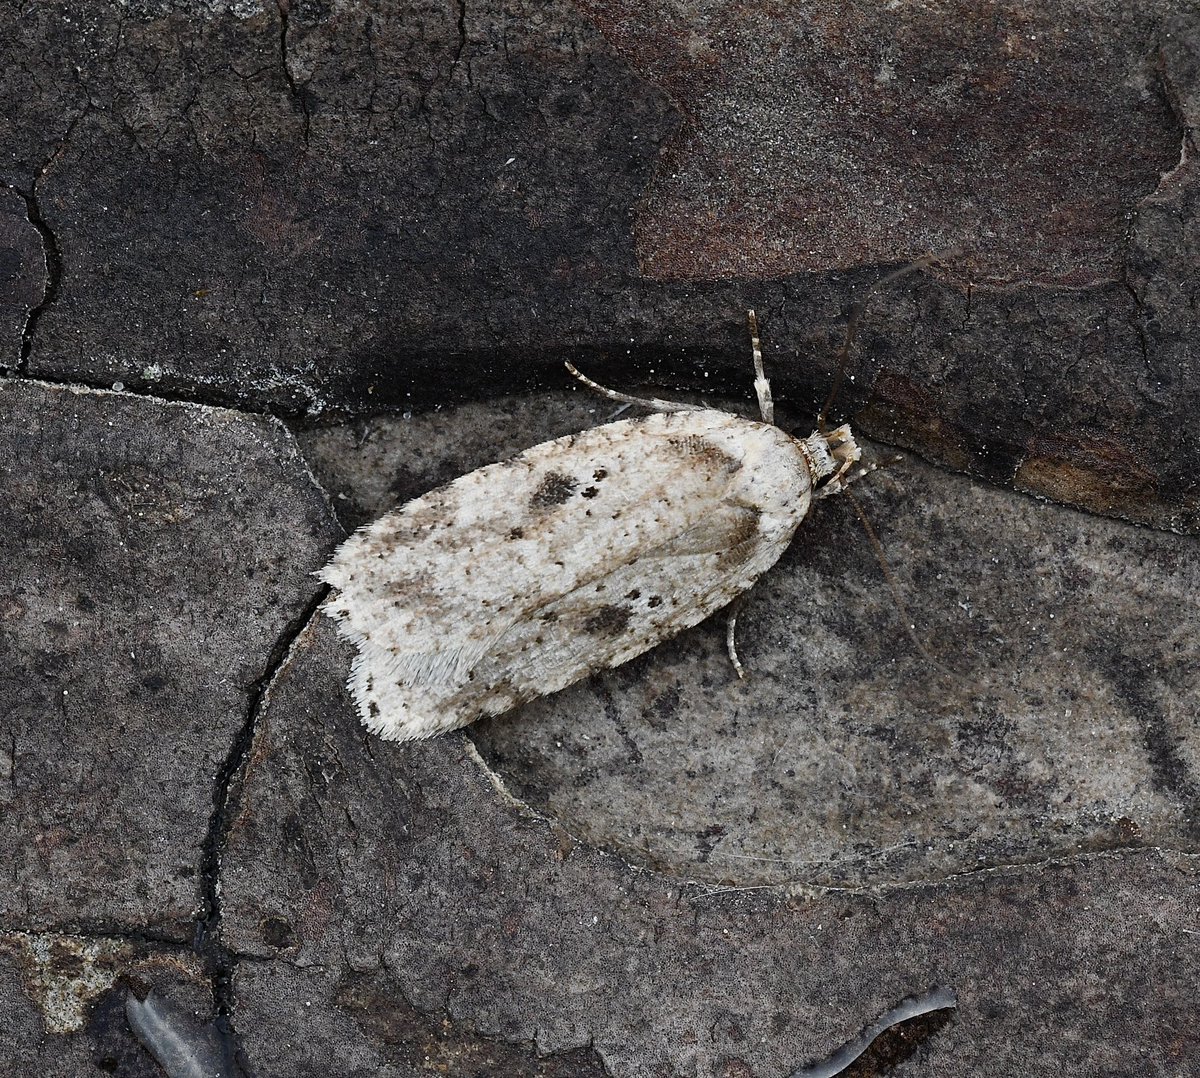 A chilly NE brought an abrupt halt to the proceedings last night for the #moths however 17/10 were found with Chocolate tip, Silver Y (3) and Flame Shoulder NFY. A Brindled Buff/Agonopterix Arenella was found during the day @norfolkmoths @NorfolkNats @BC_Norfolk #mothsmatter